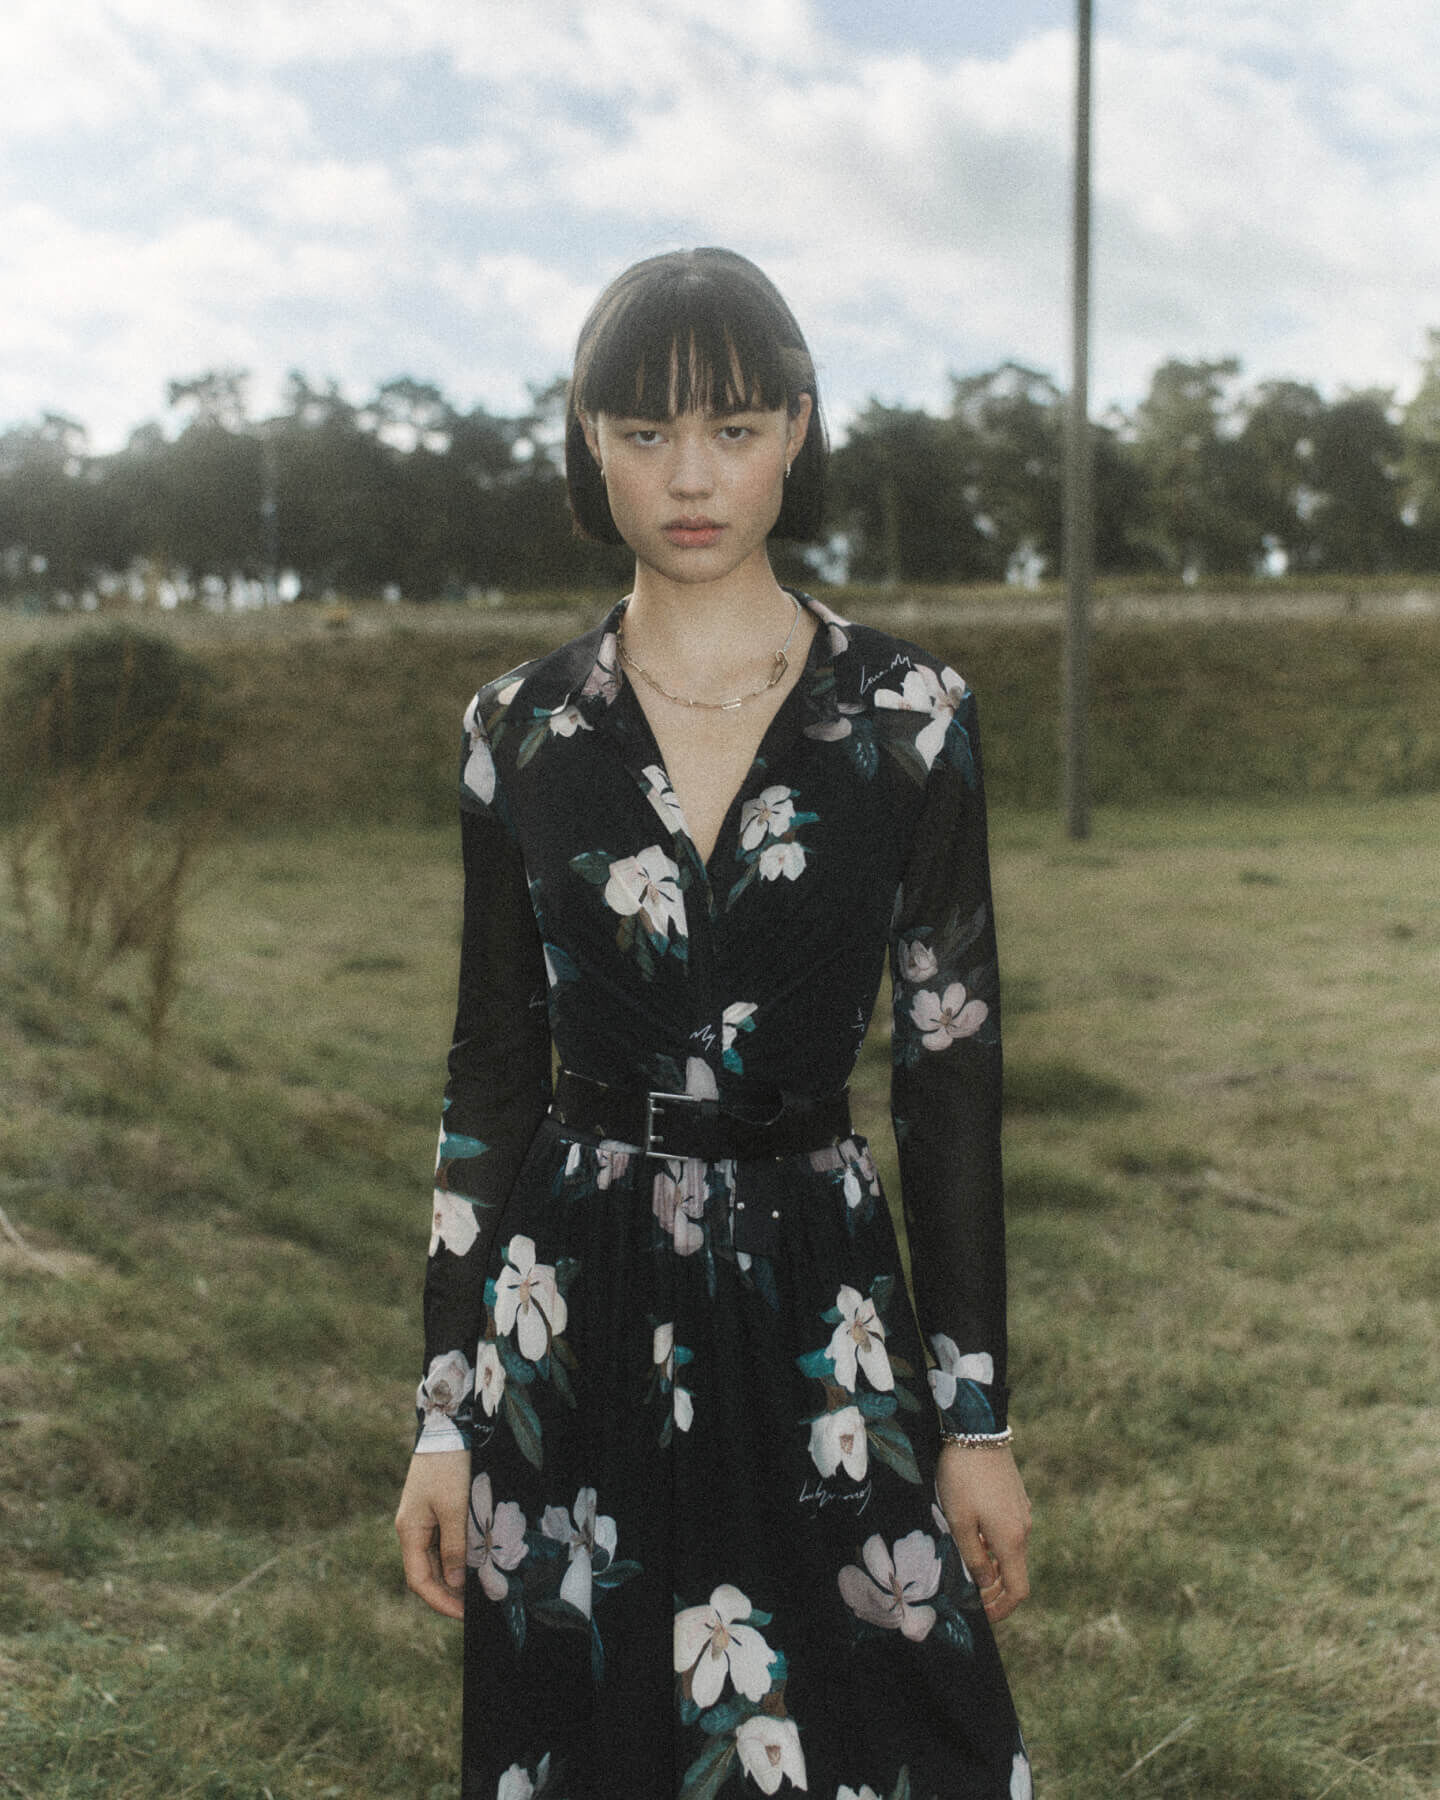 Women wearing a black floral dress with black leather belt and silver jewellery in a field